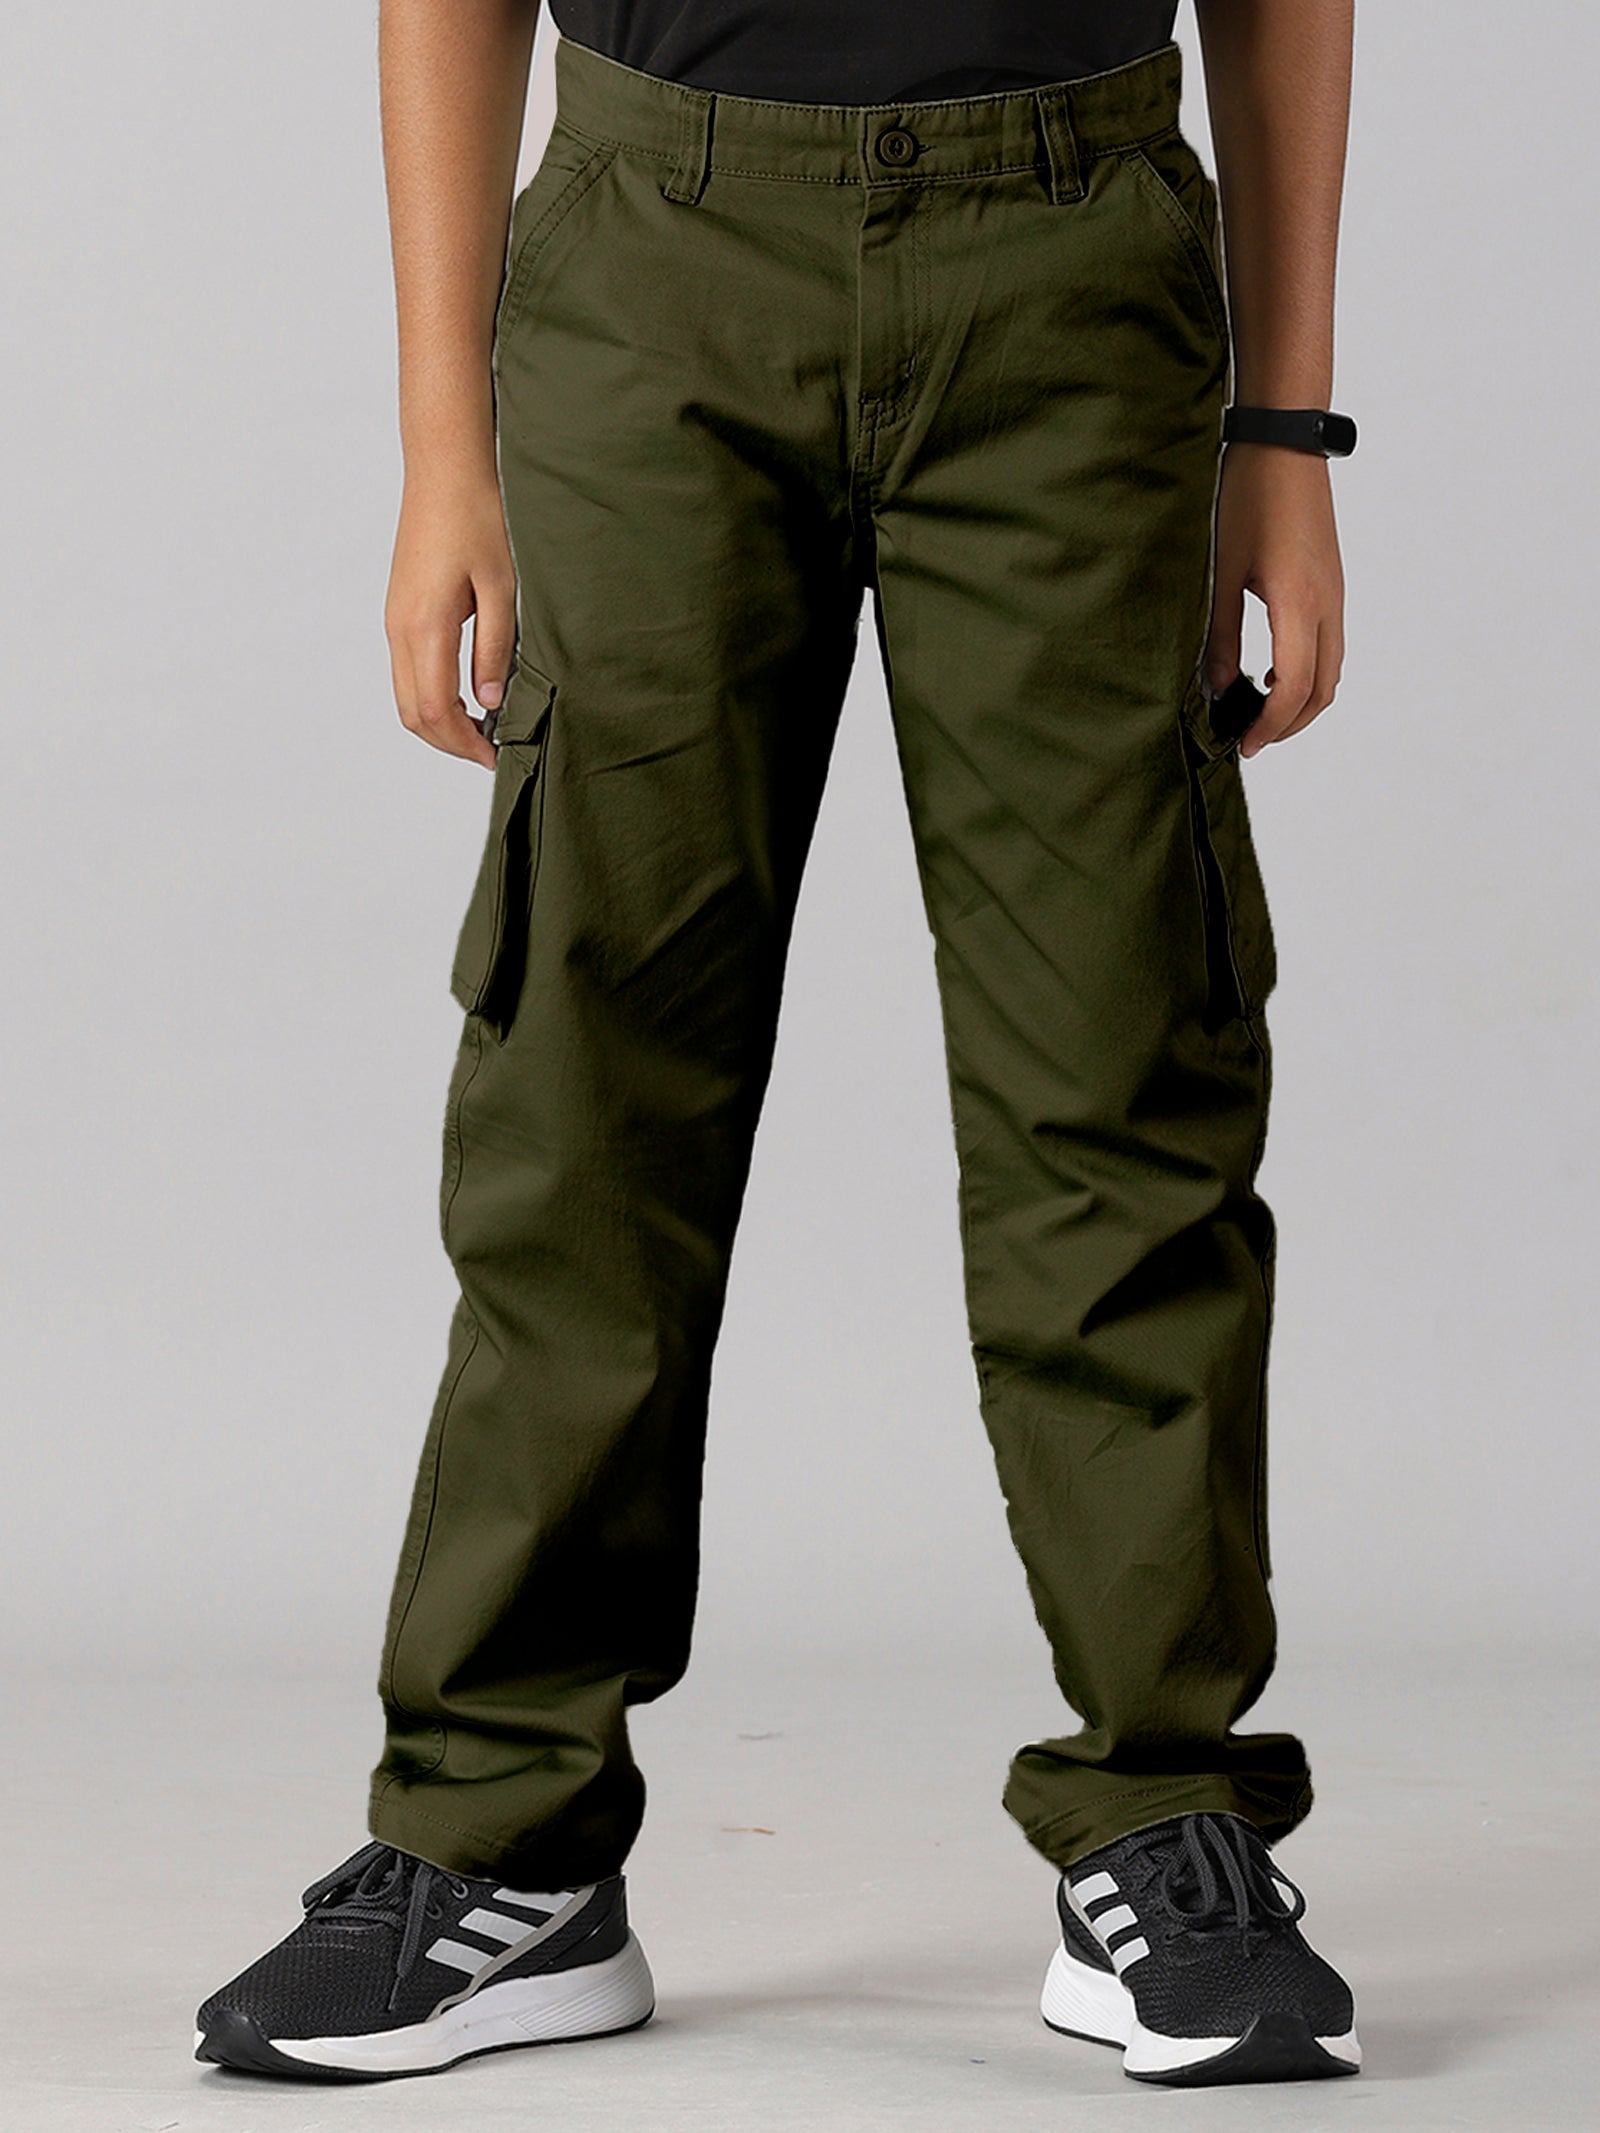 Kids Boys Cargo Pants Trousers Solid Color Soft Comfort Pants Outdoor  Cotton Fashion Daily Black Army Green Khaki Mid Waist 2023 - US $23.99 in  2023 | Boys cargo pants, Bottom clothes, Cargo pants